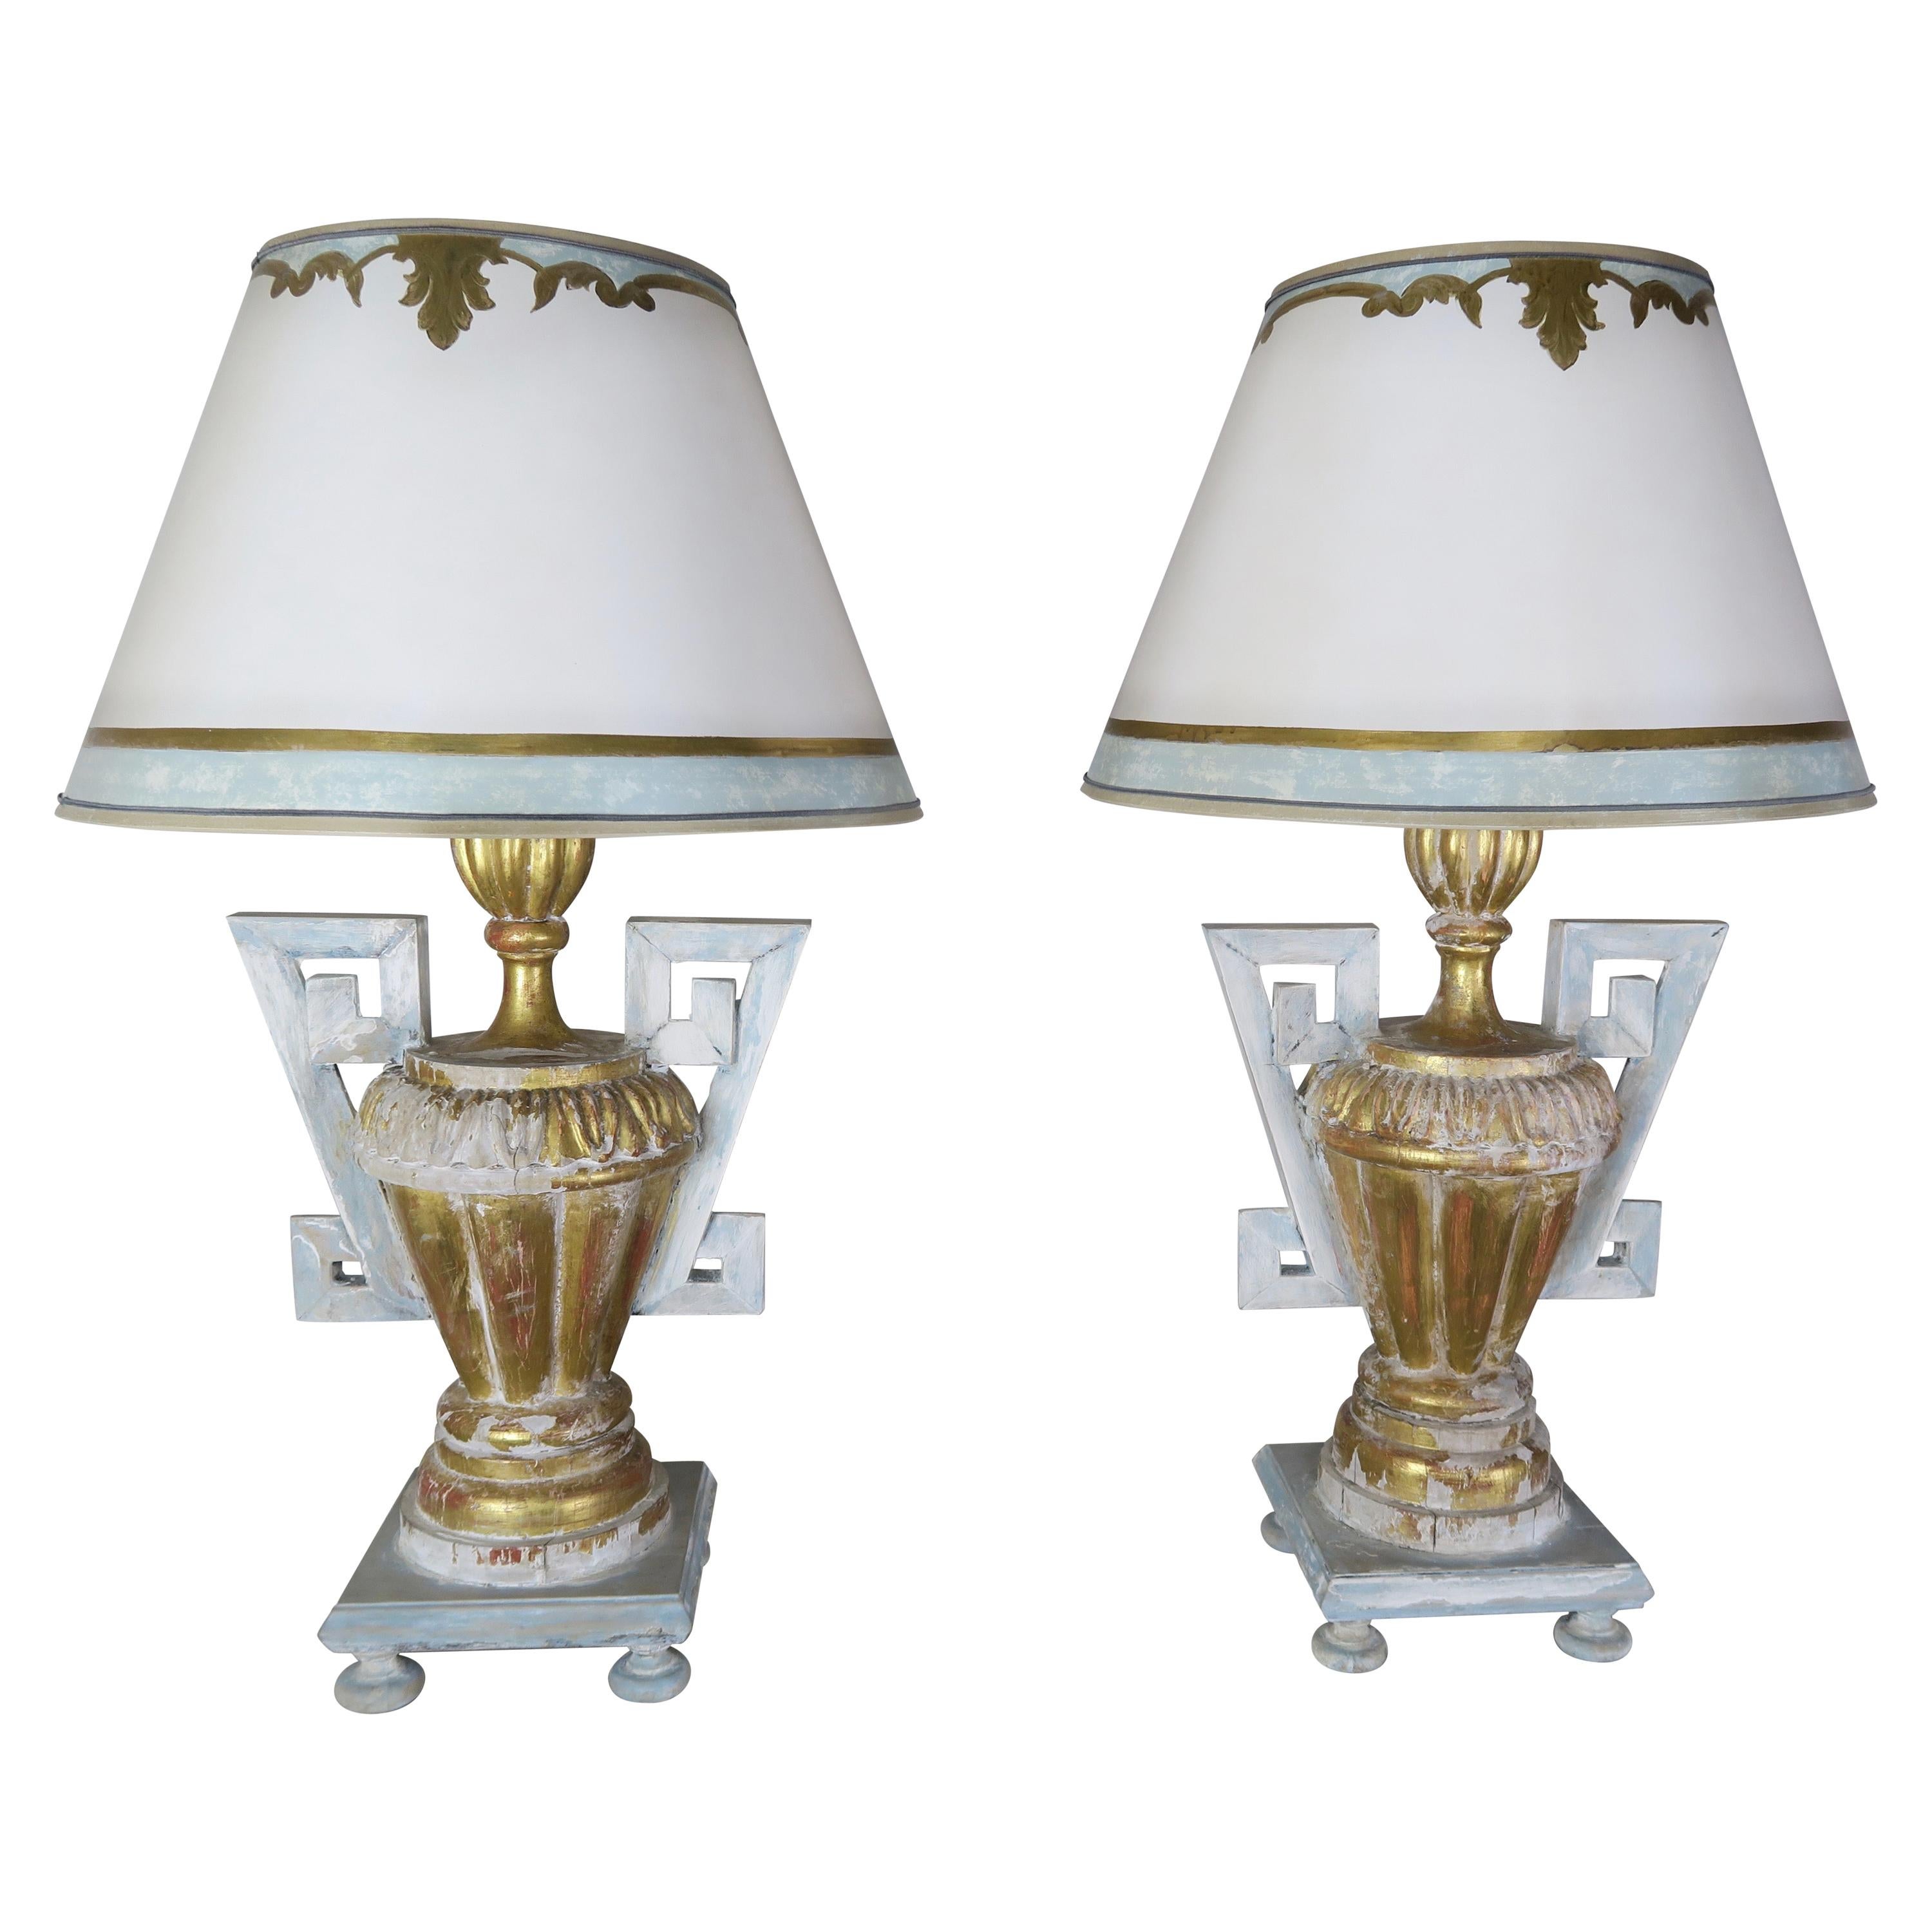 Pair of Greek Key Painted Lamps with Parchment Shades